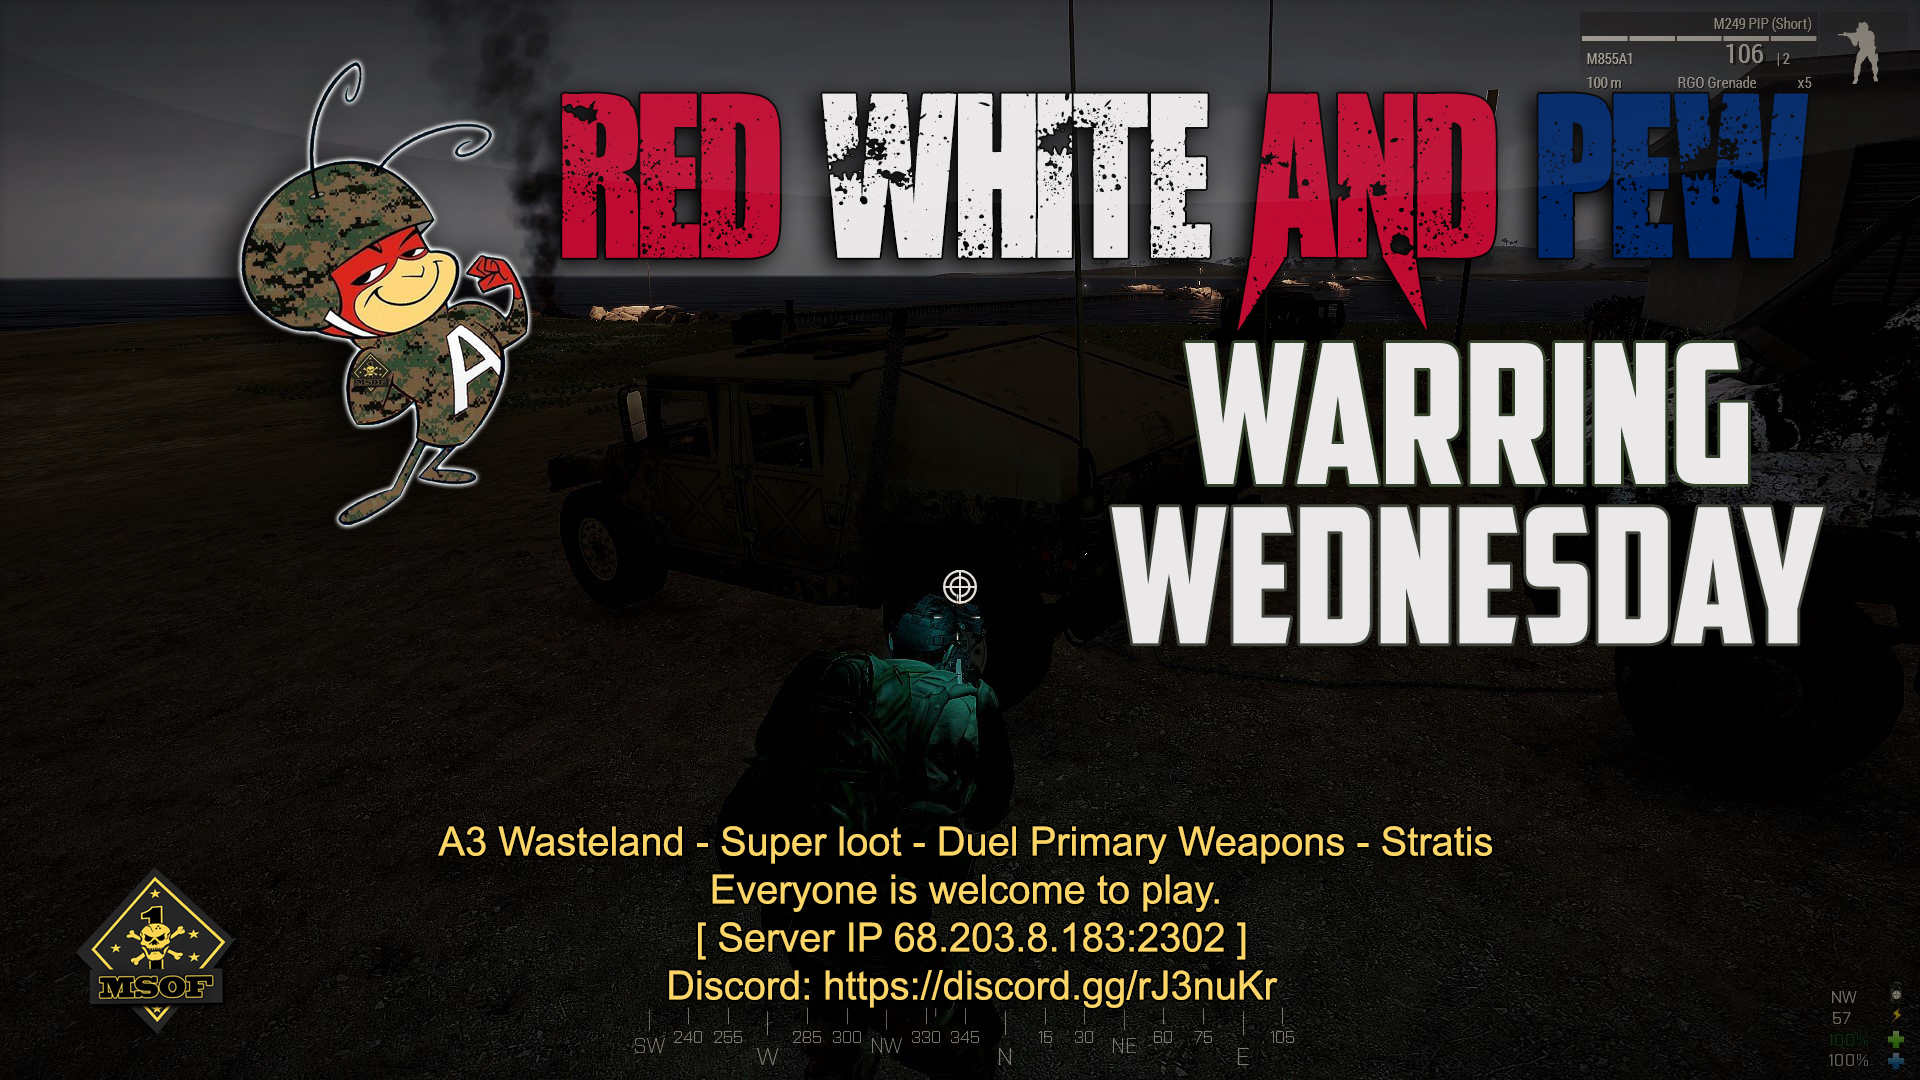 Warring Wednesday on A3 Wasteland! Join In for some Wednesday night A3 Wasteland. Join us at "A3 Wasteland - Super loot - Duel Primary Weapons - Stratis" Everyone is welcome to play